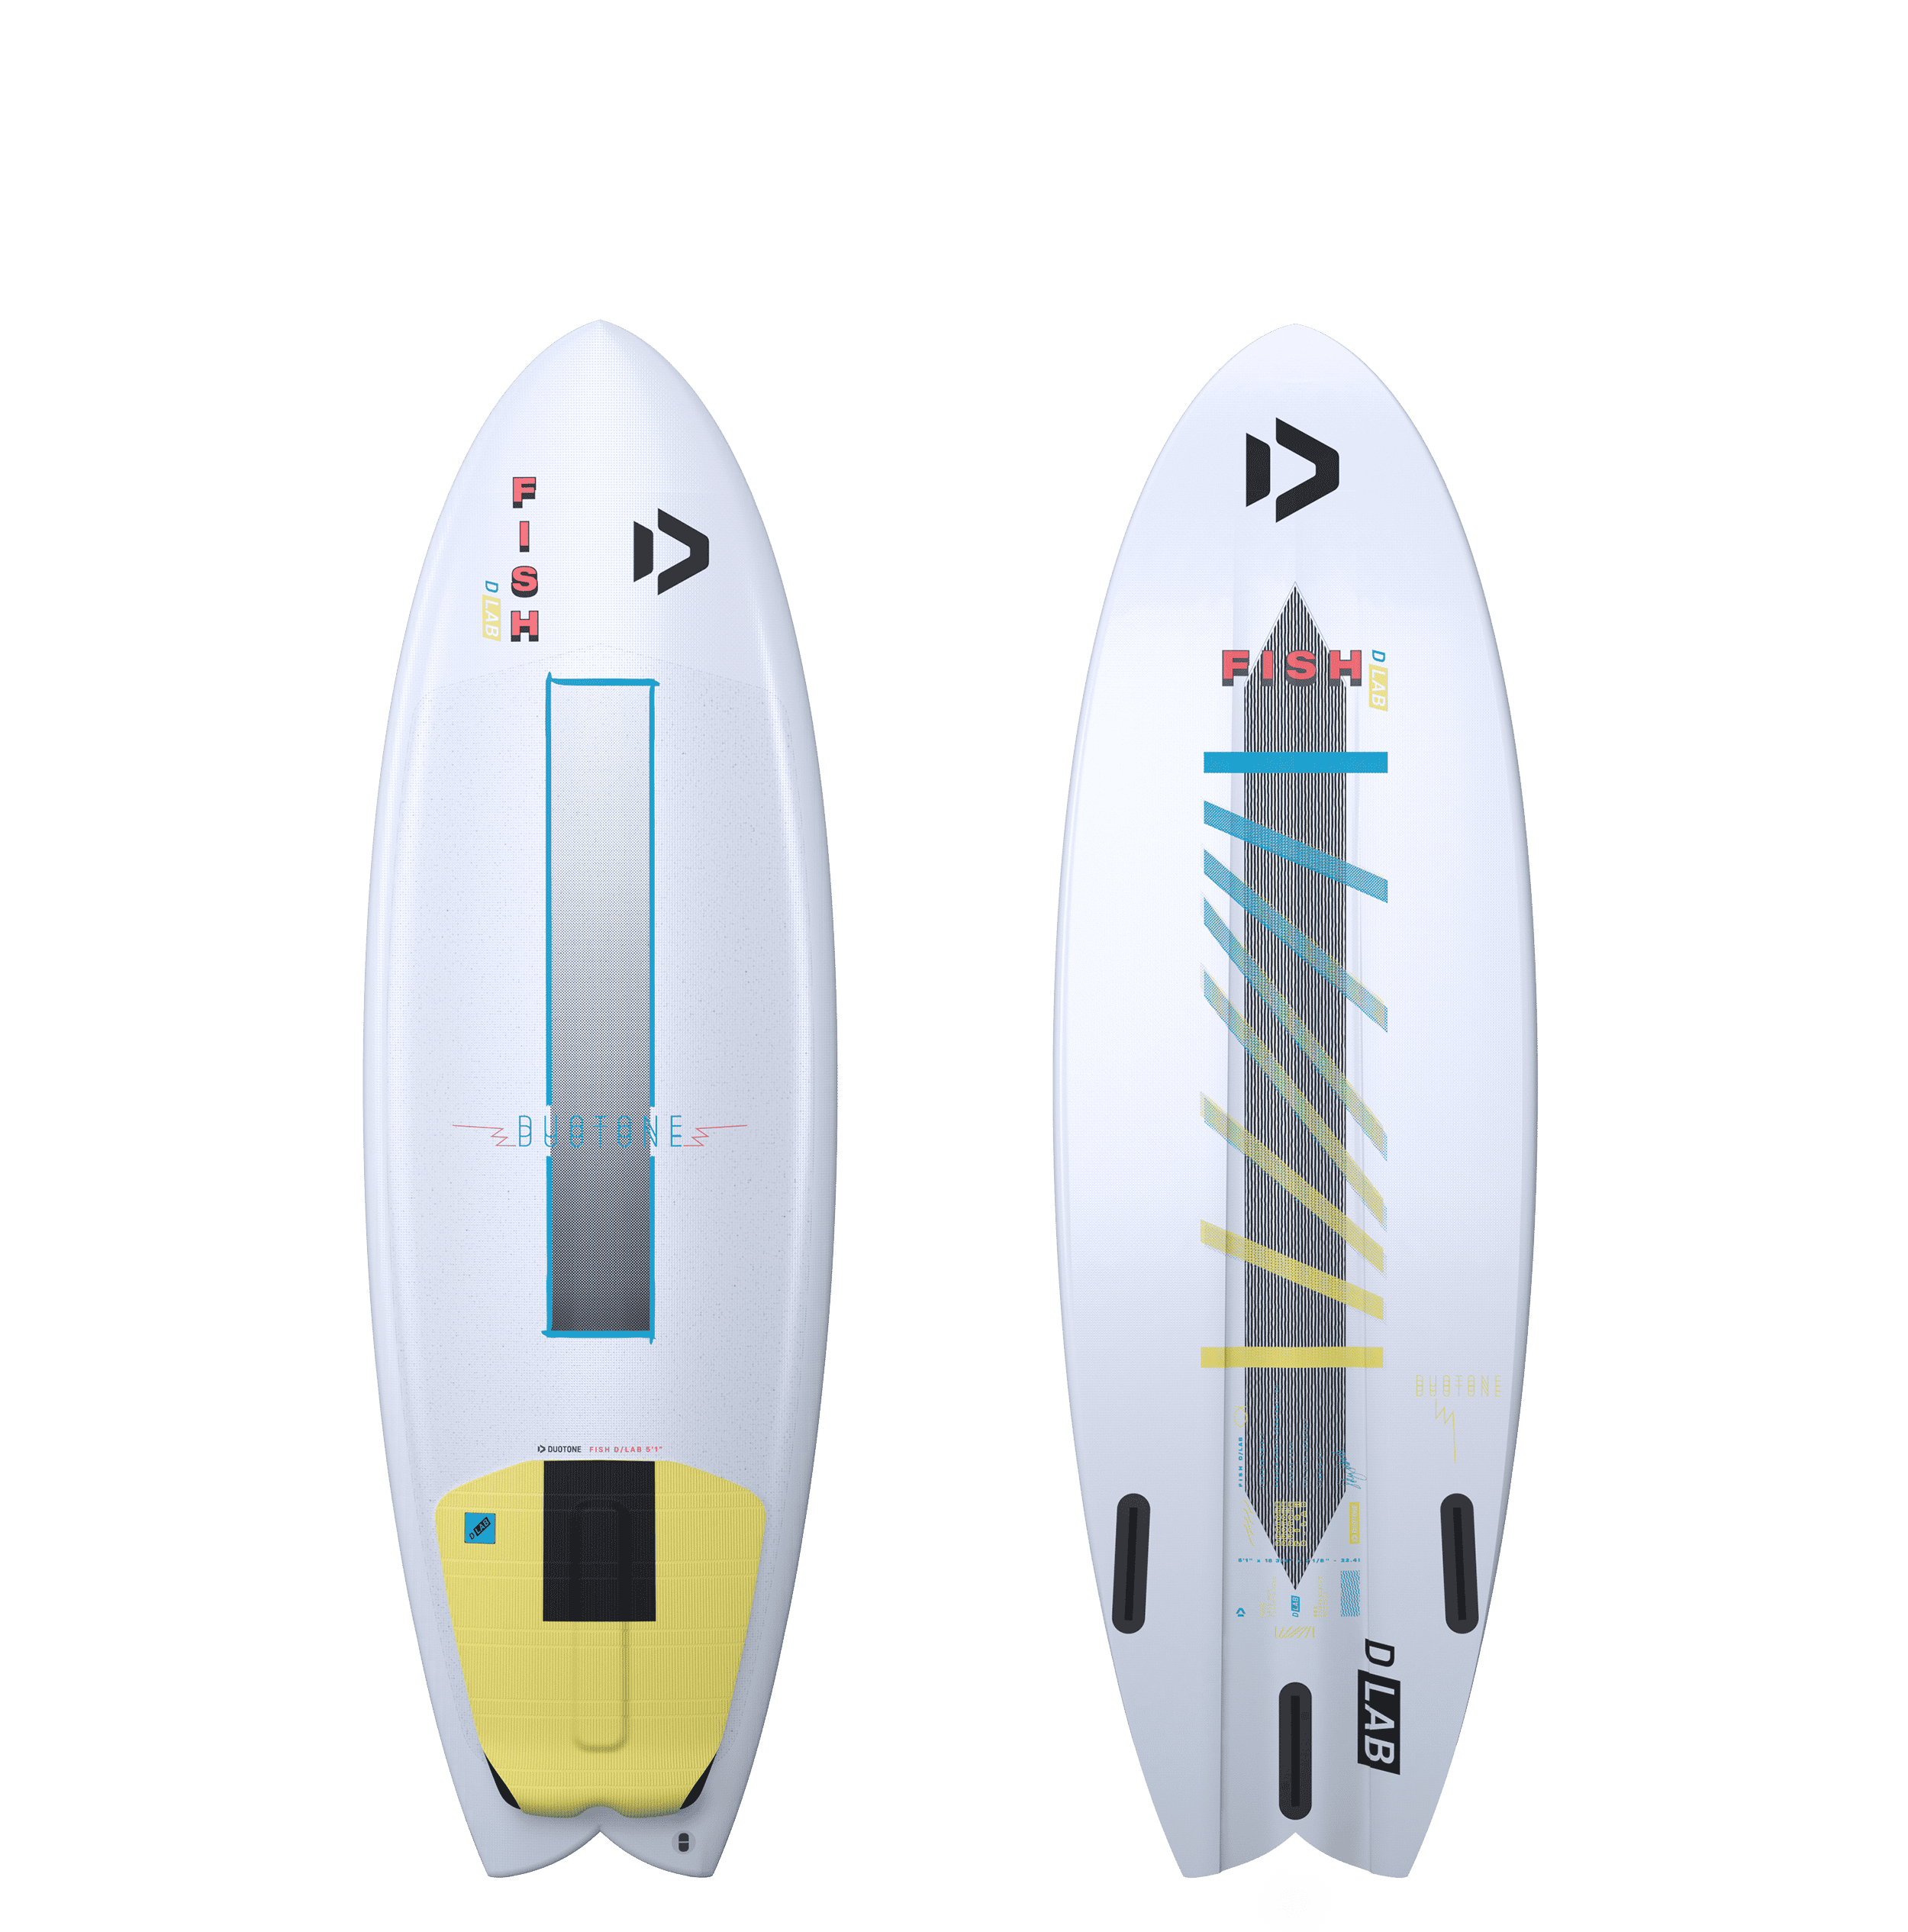 How much is a surfboard worth?